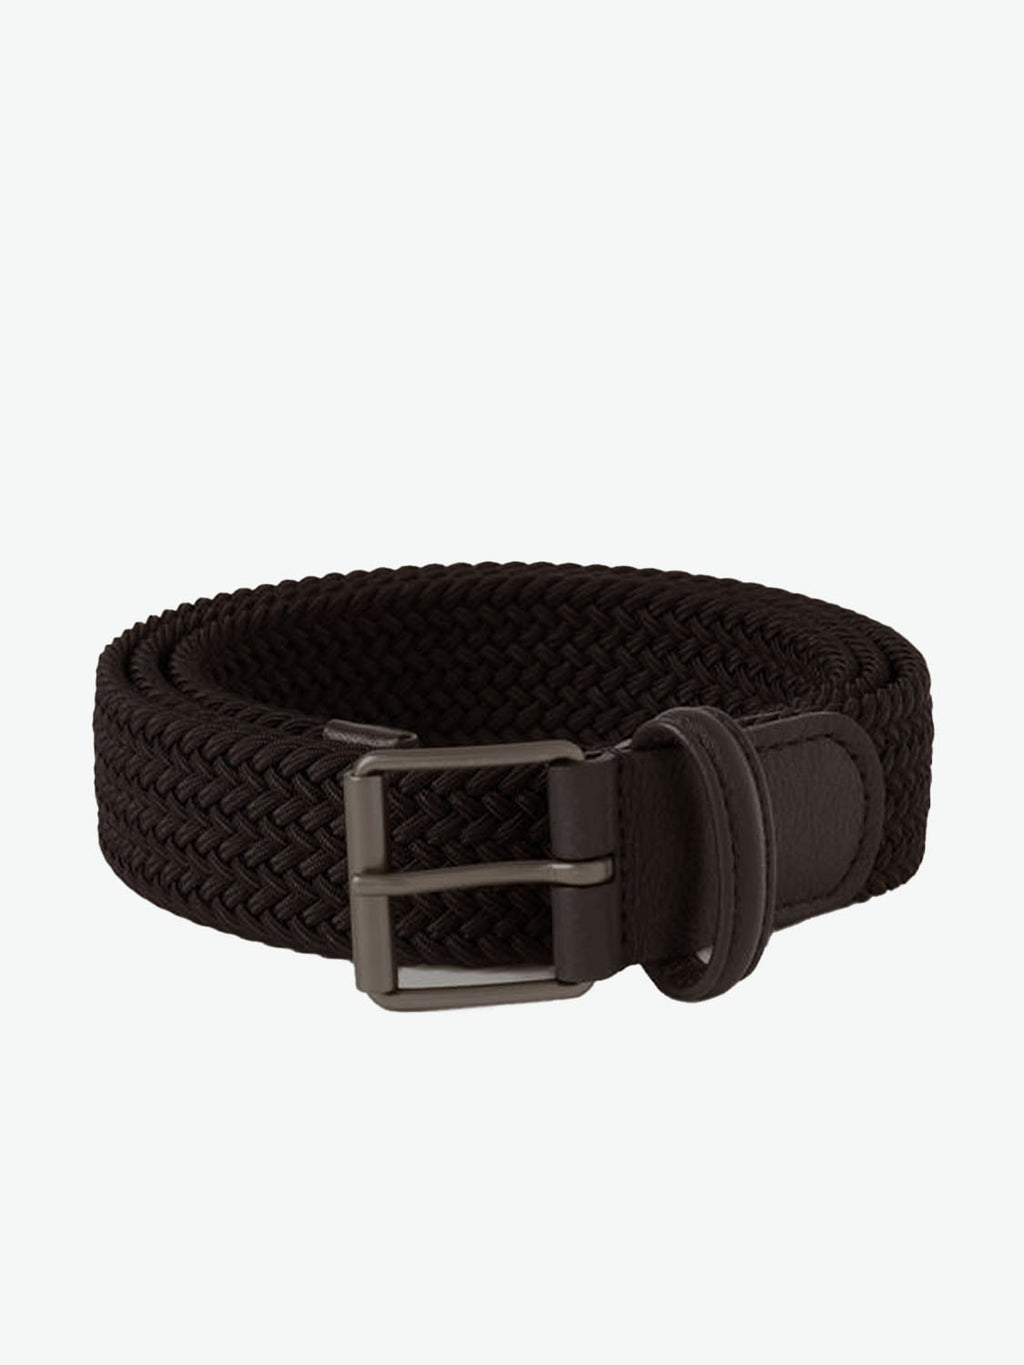 Anderson's Belt Leather-Trimmed Woven Dark Brown